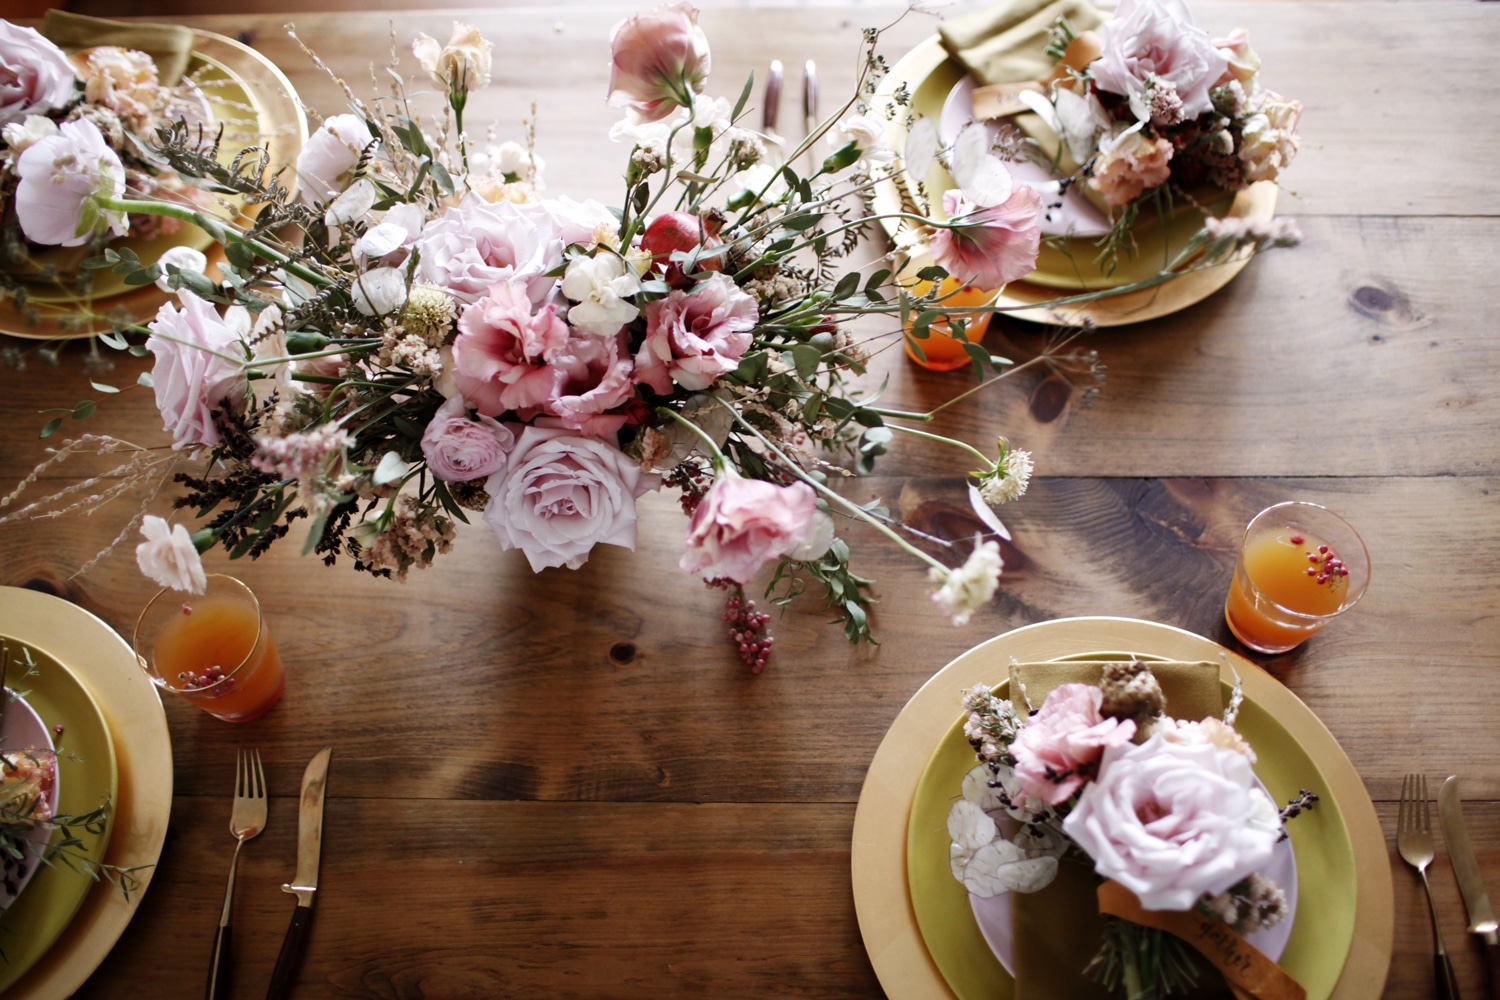 a golden palette and pink florals set the tone for this Thanksgiving tabletop | via coco kelley